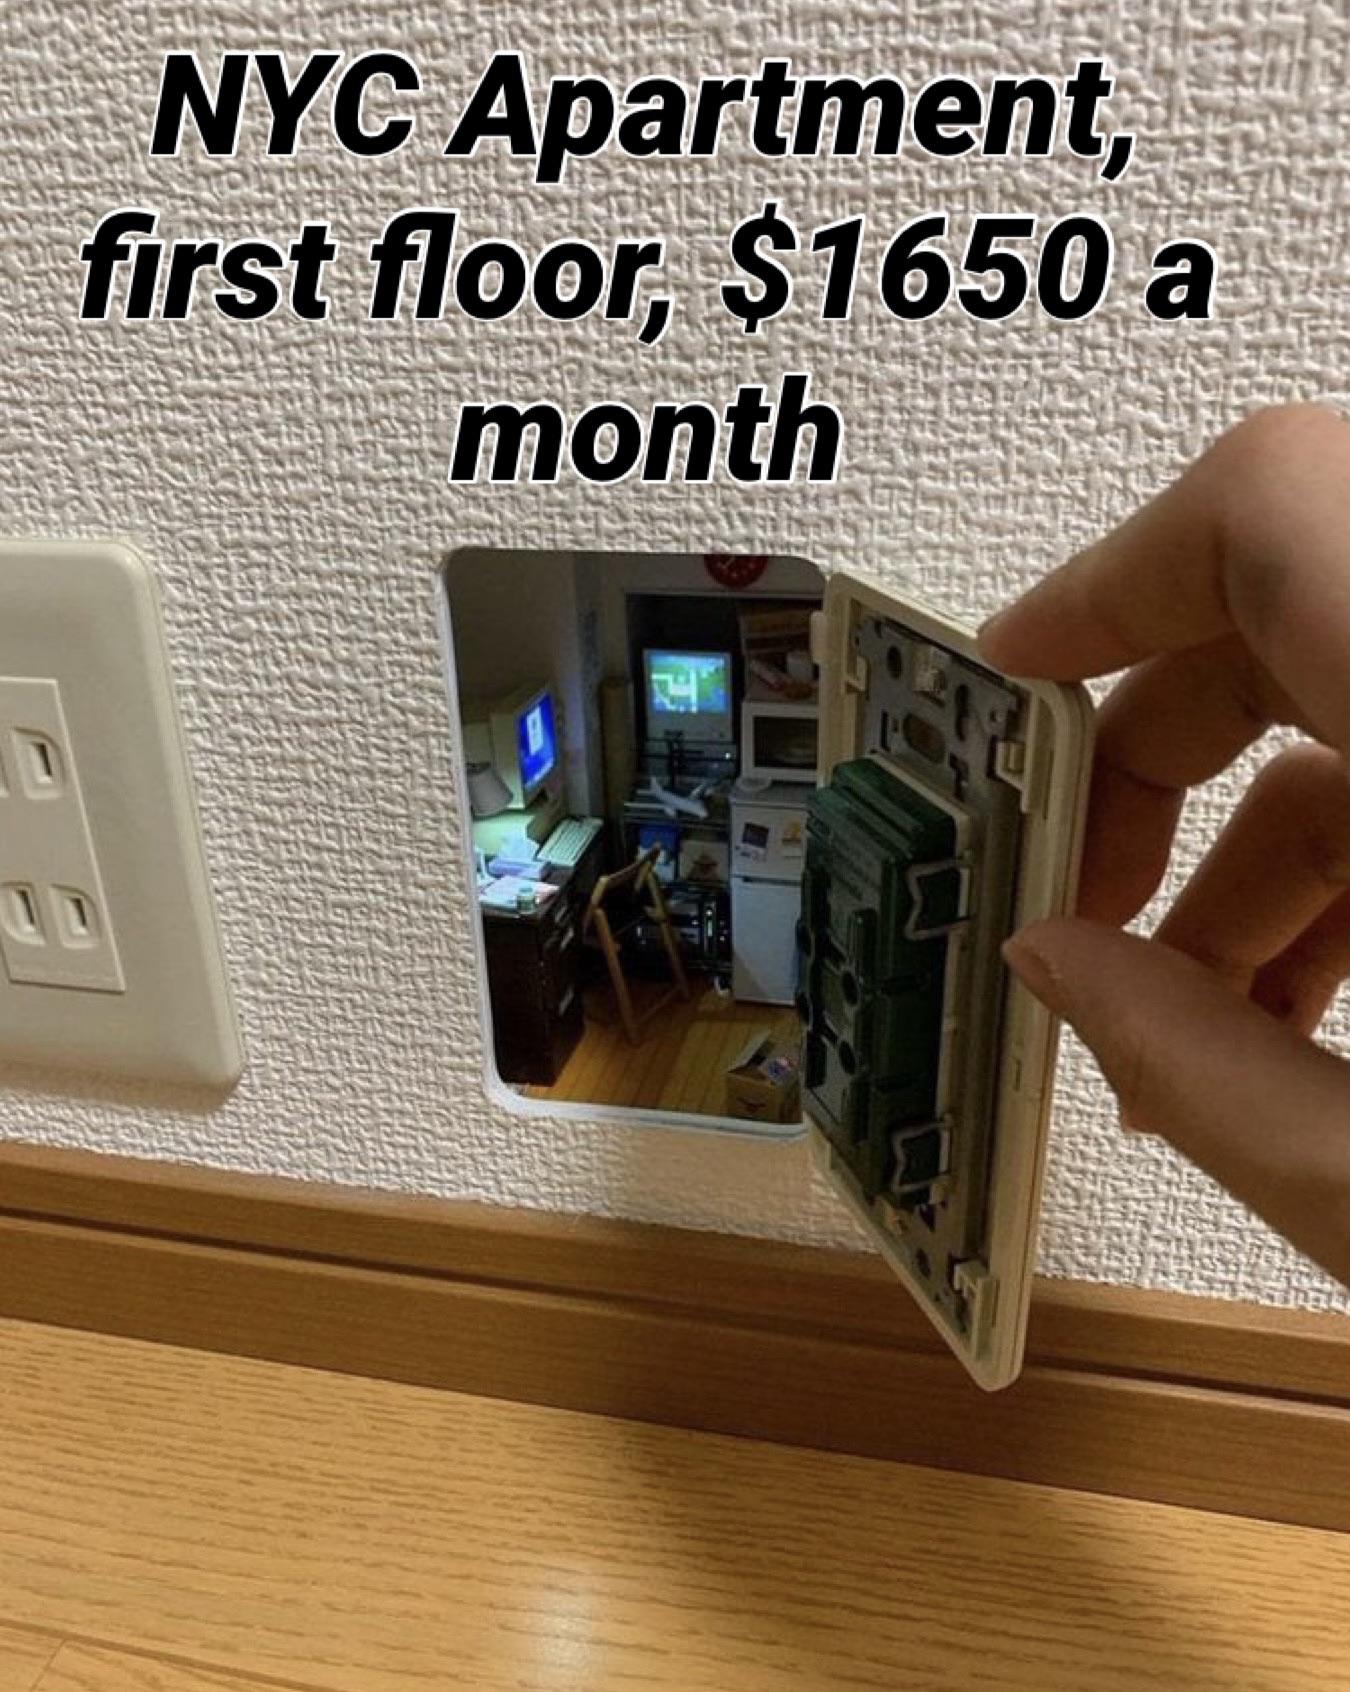 dank memes - funny memes - miniature creations of mozu - Nyc Apartment, first floor, $1650 a month 1